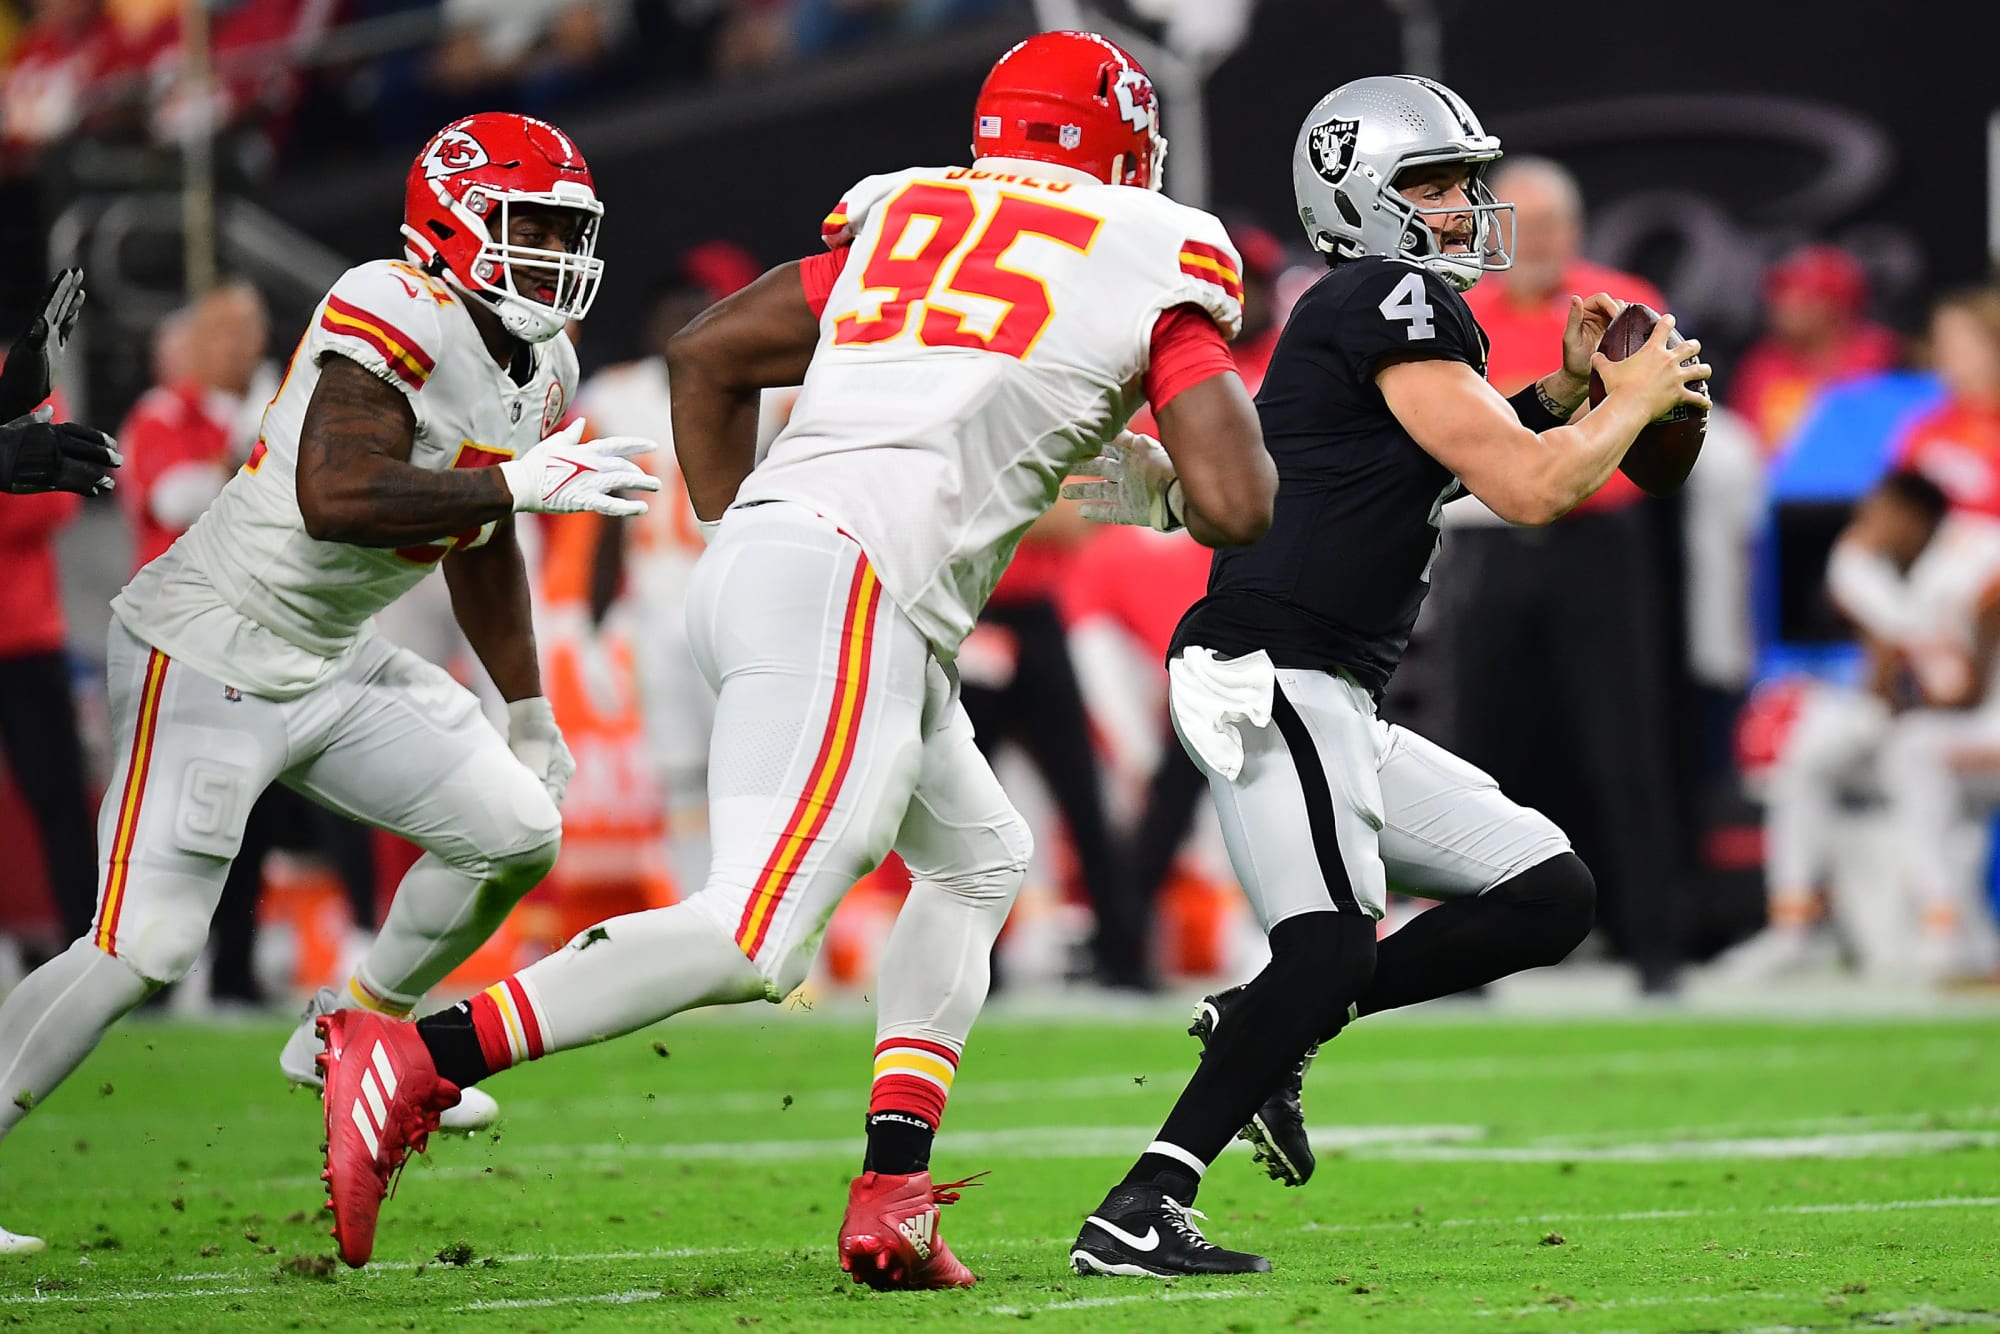 KC Chiefs defense has drastically improved in last 5 weeks